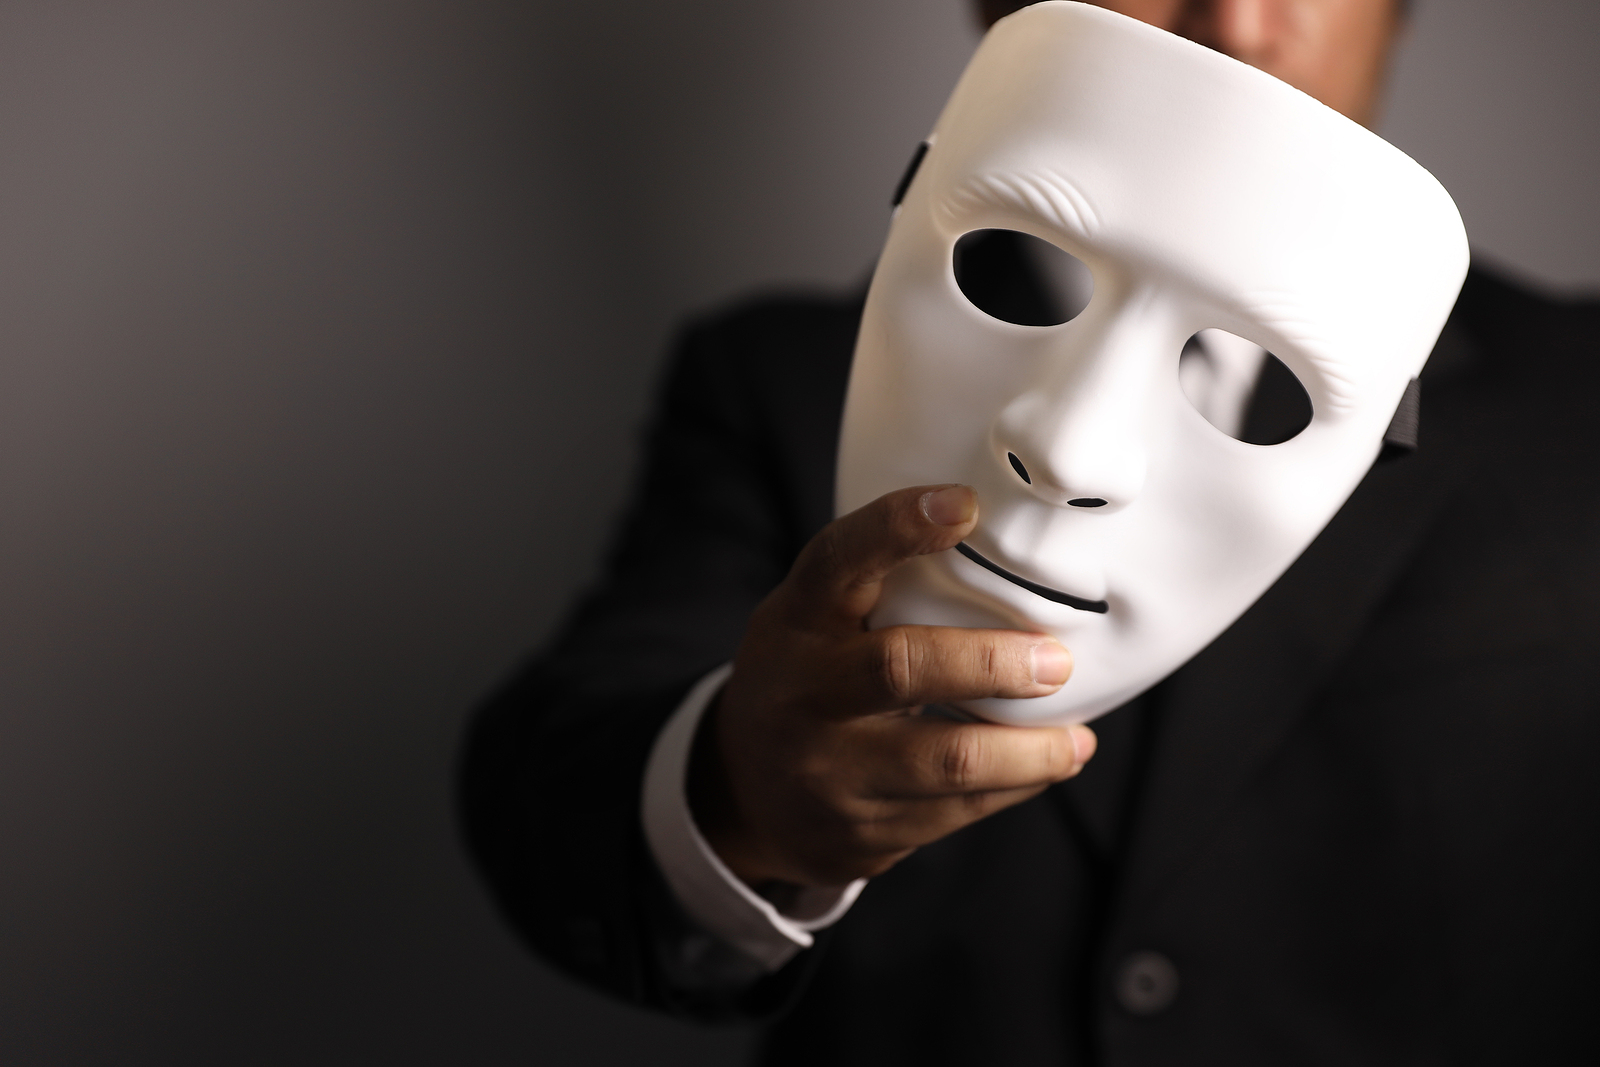 Businessman in suit holding a featureless white mask up to their face.